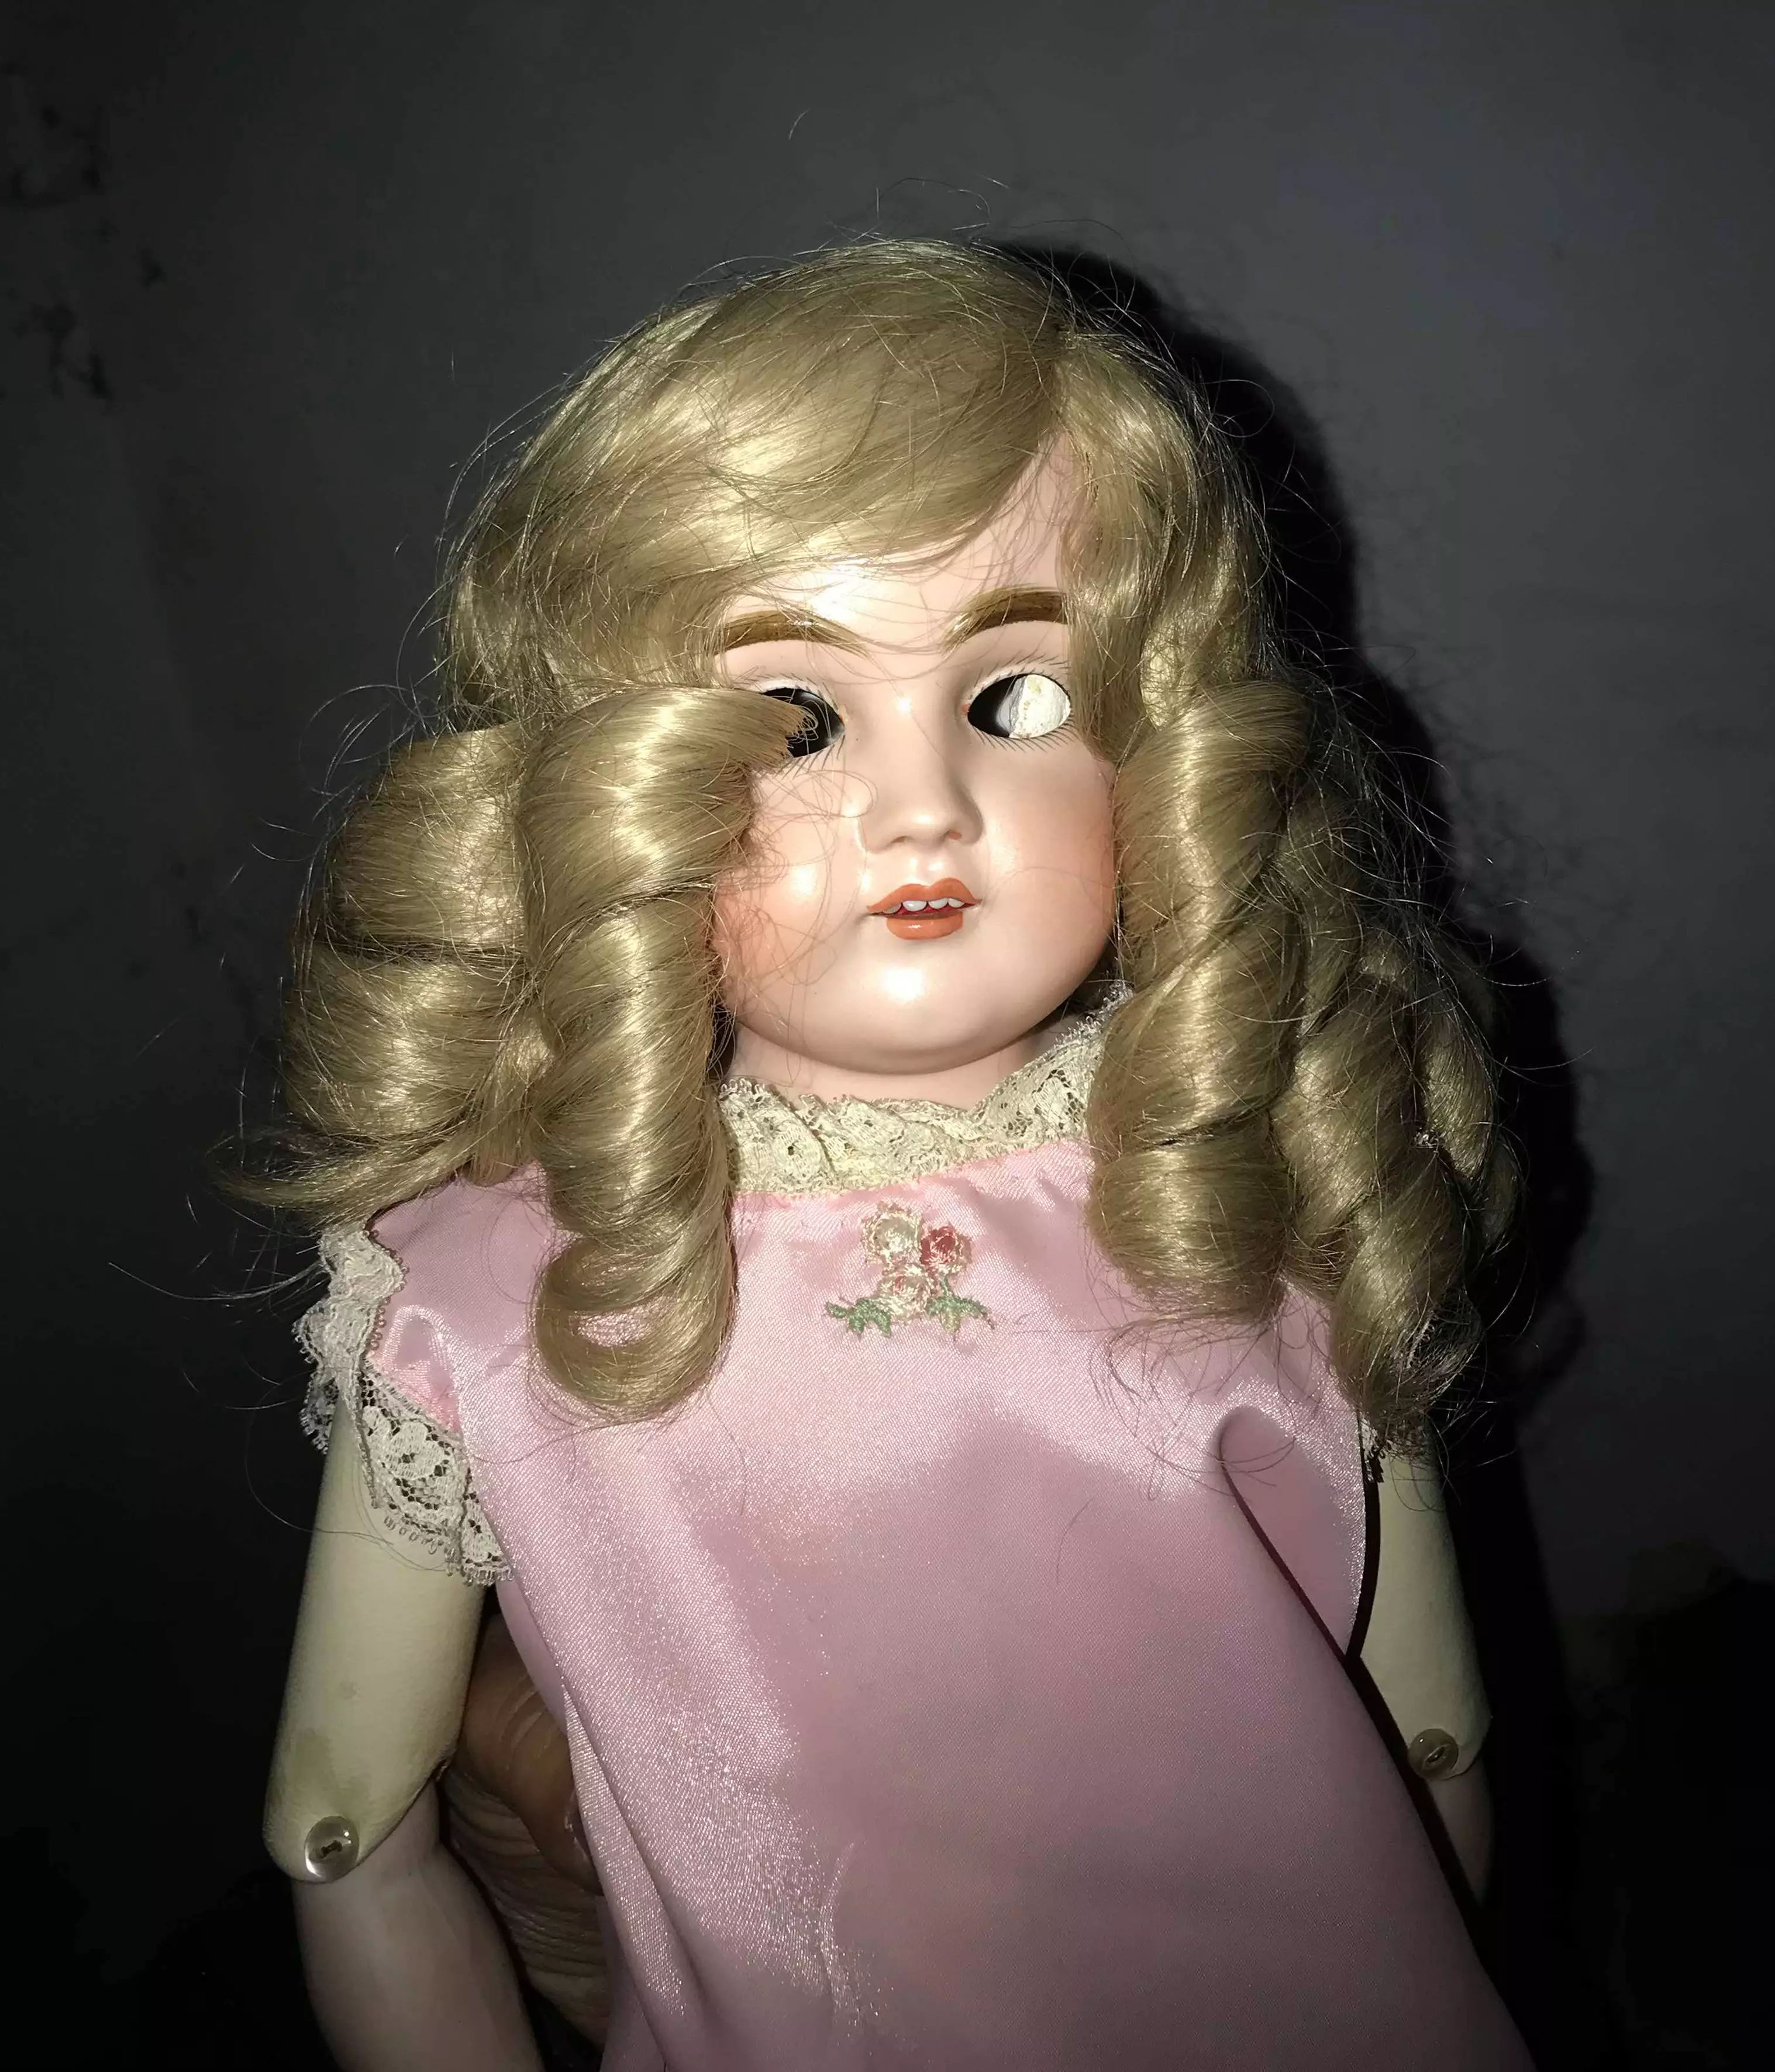 The doll doesn't have eyes or eyelids.